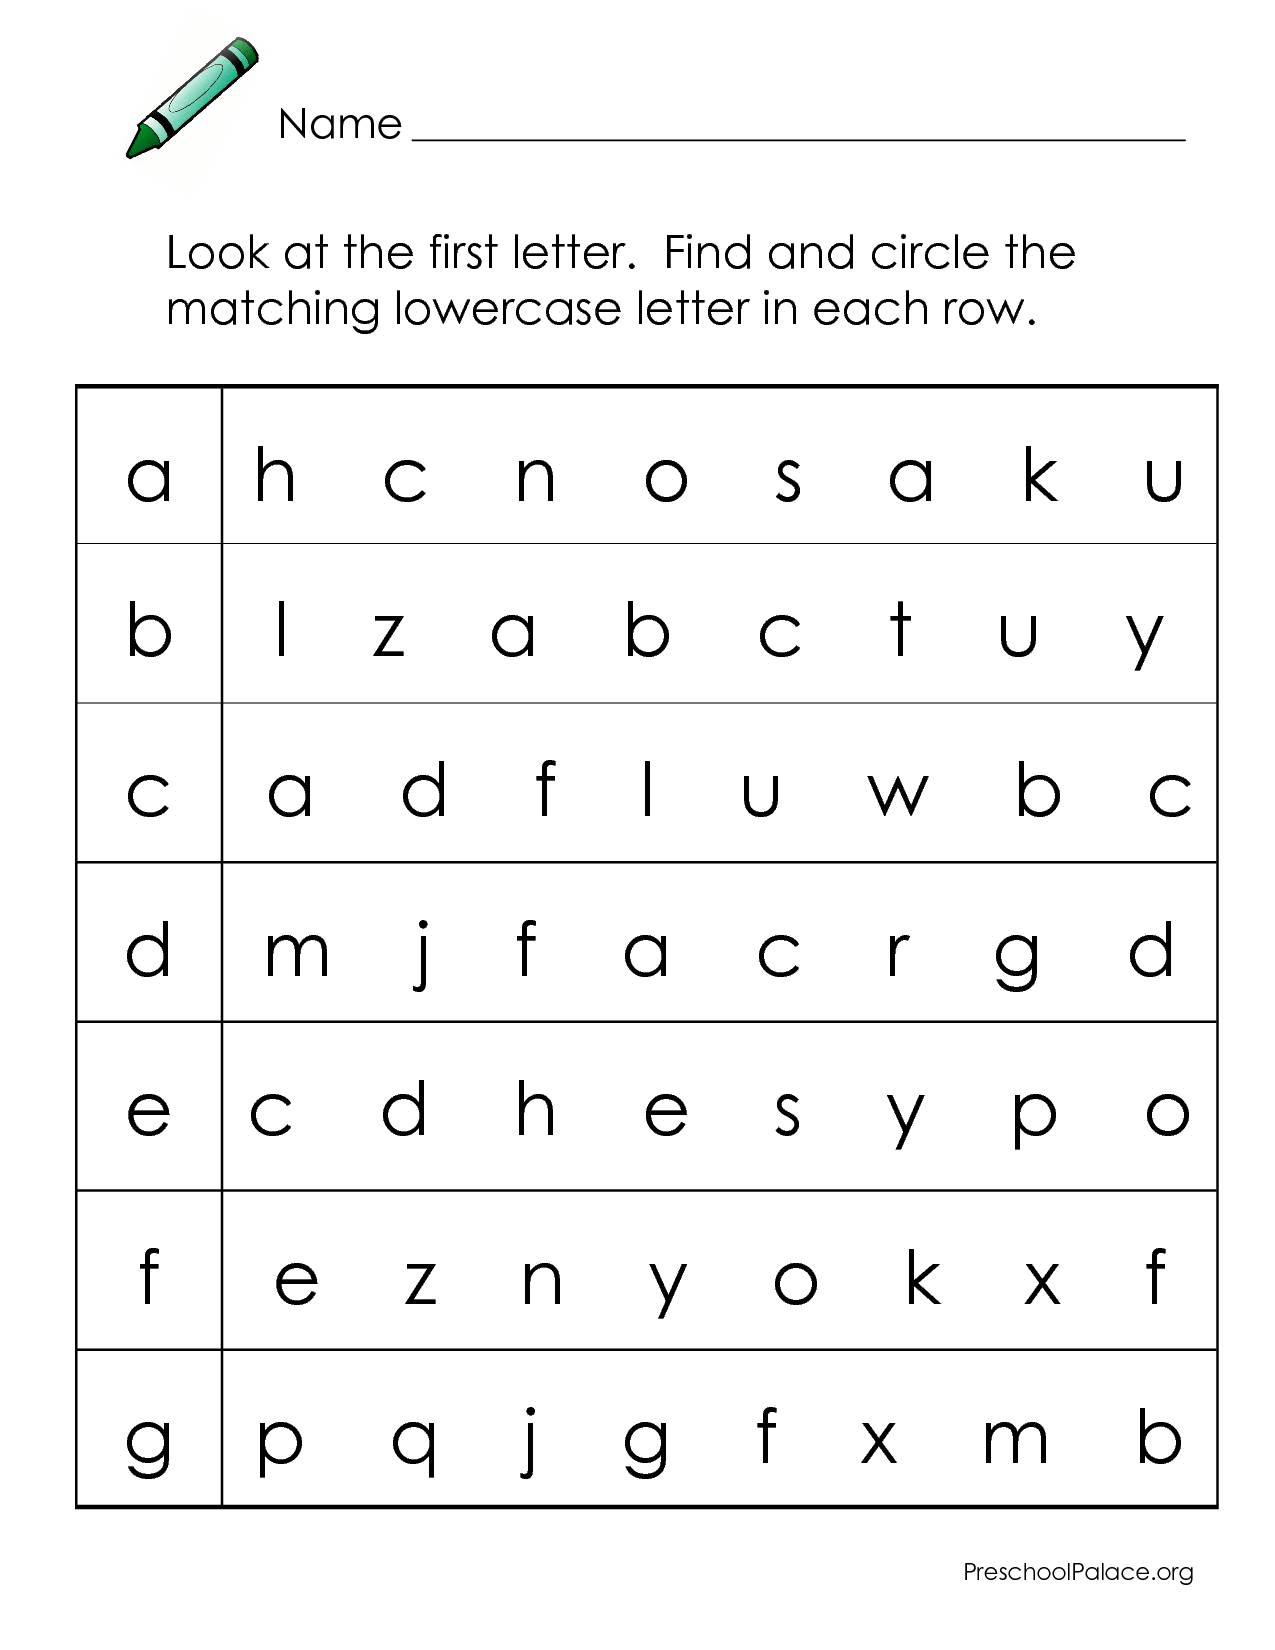 Abcs - Letter Matching A-G Lowercase | Letter Recognition throughout Alphabet Recognition Worksheets For Nursery